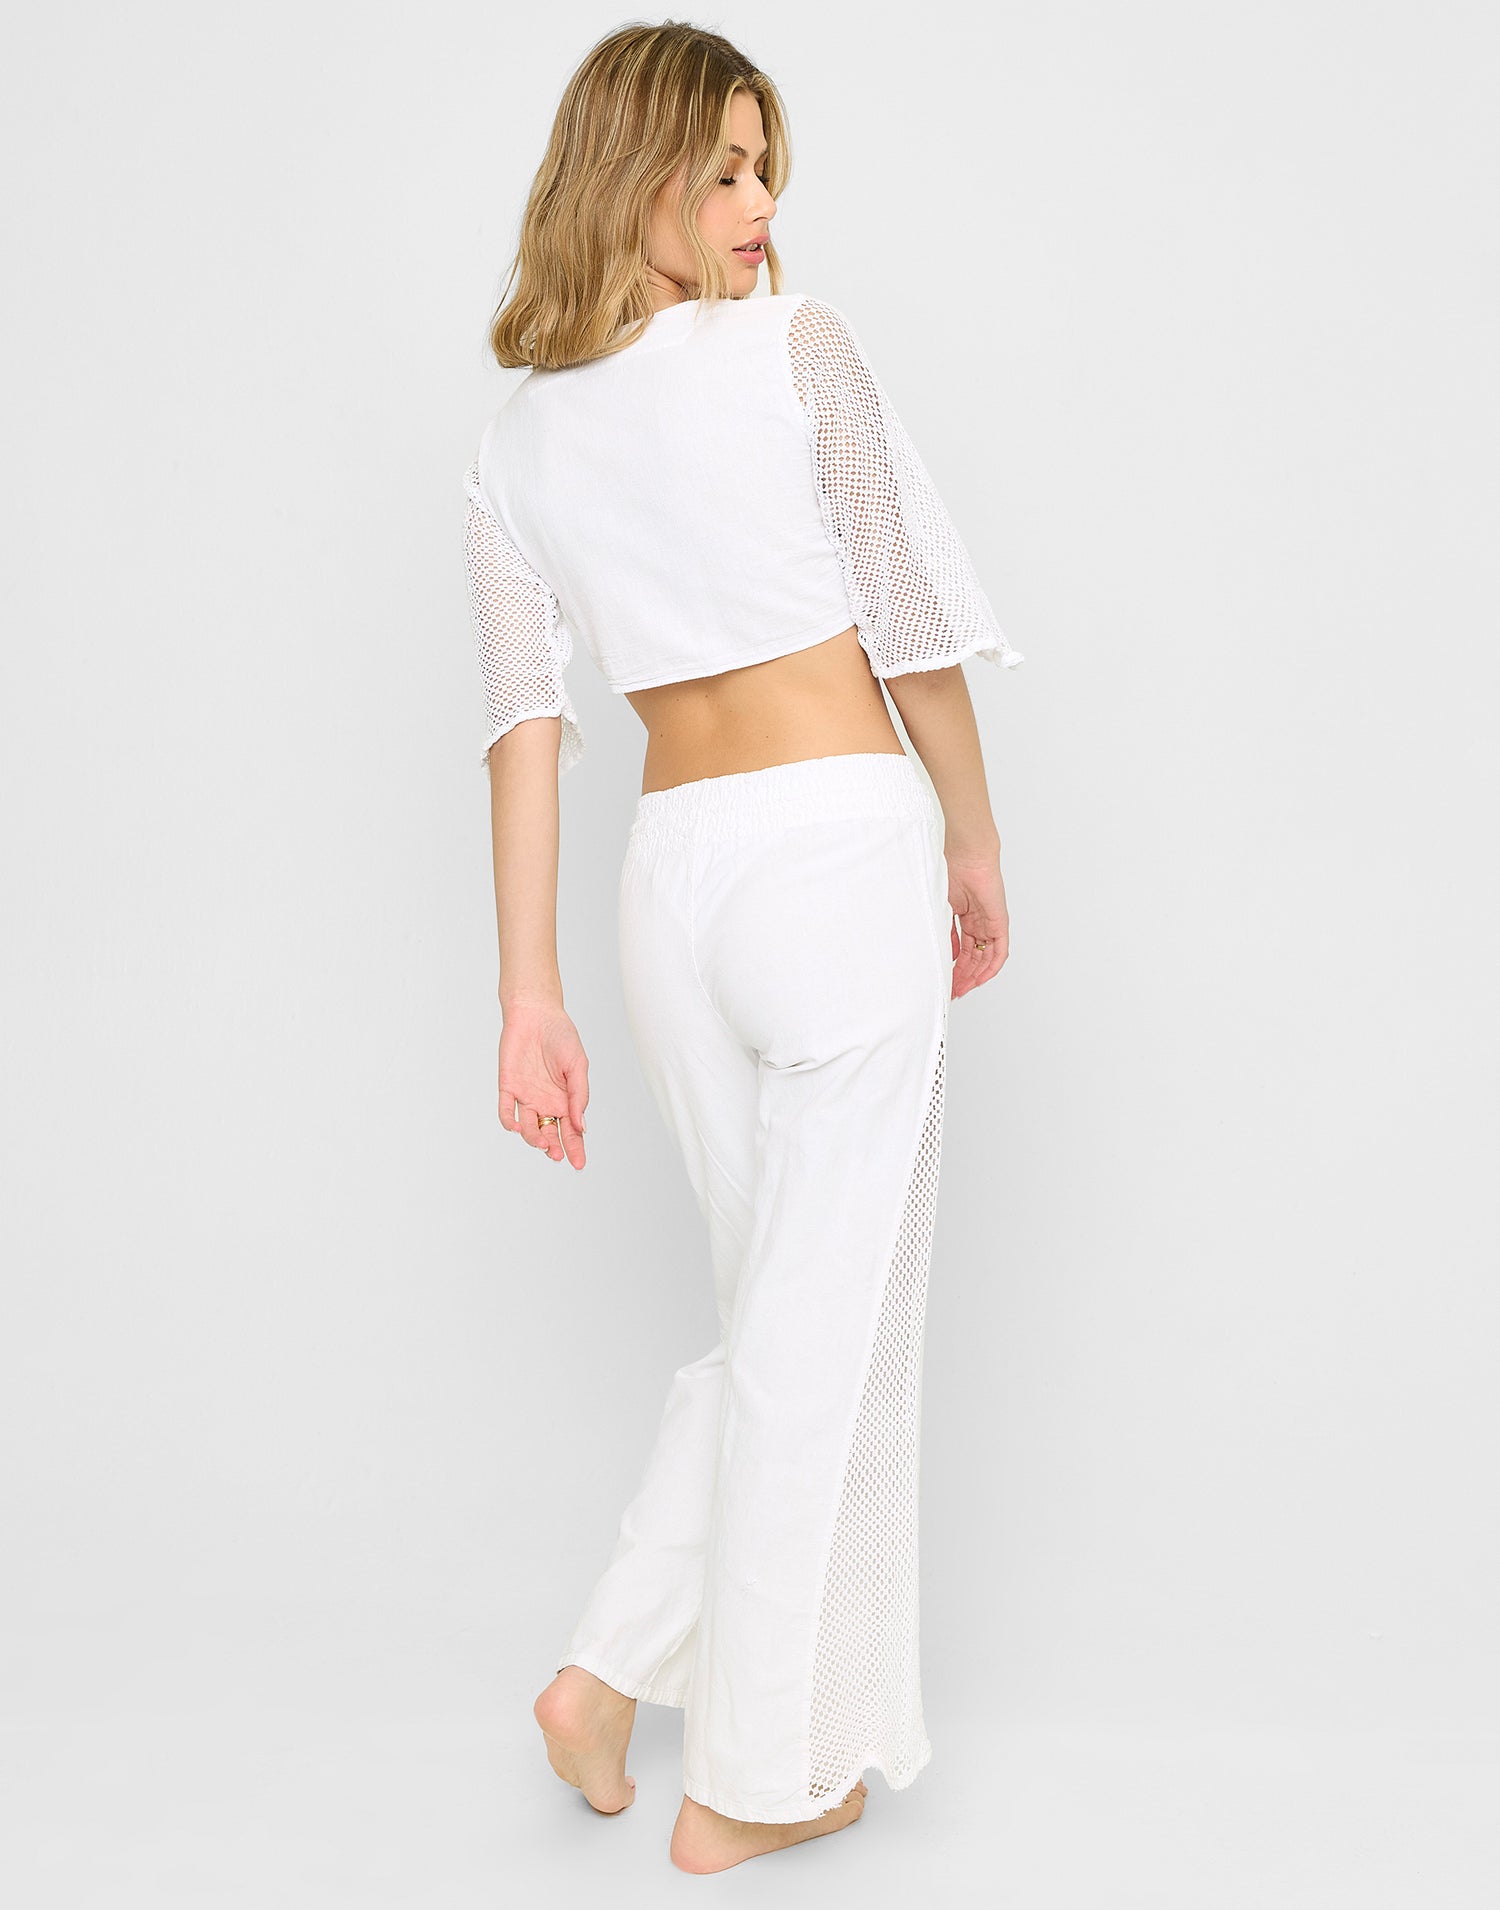 Nelly Front Tie Crop Top in White with Mesh Sleeves - Back View